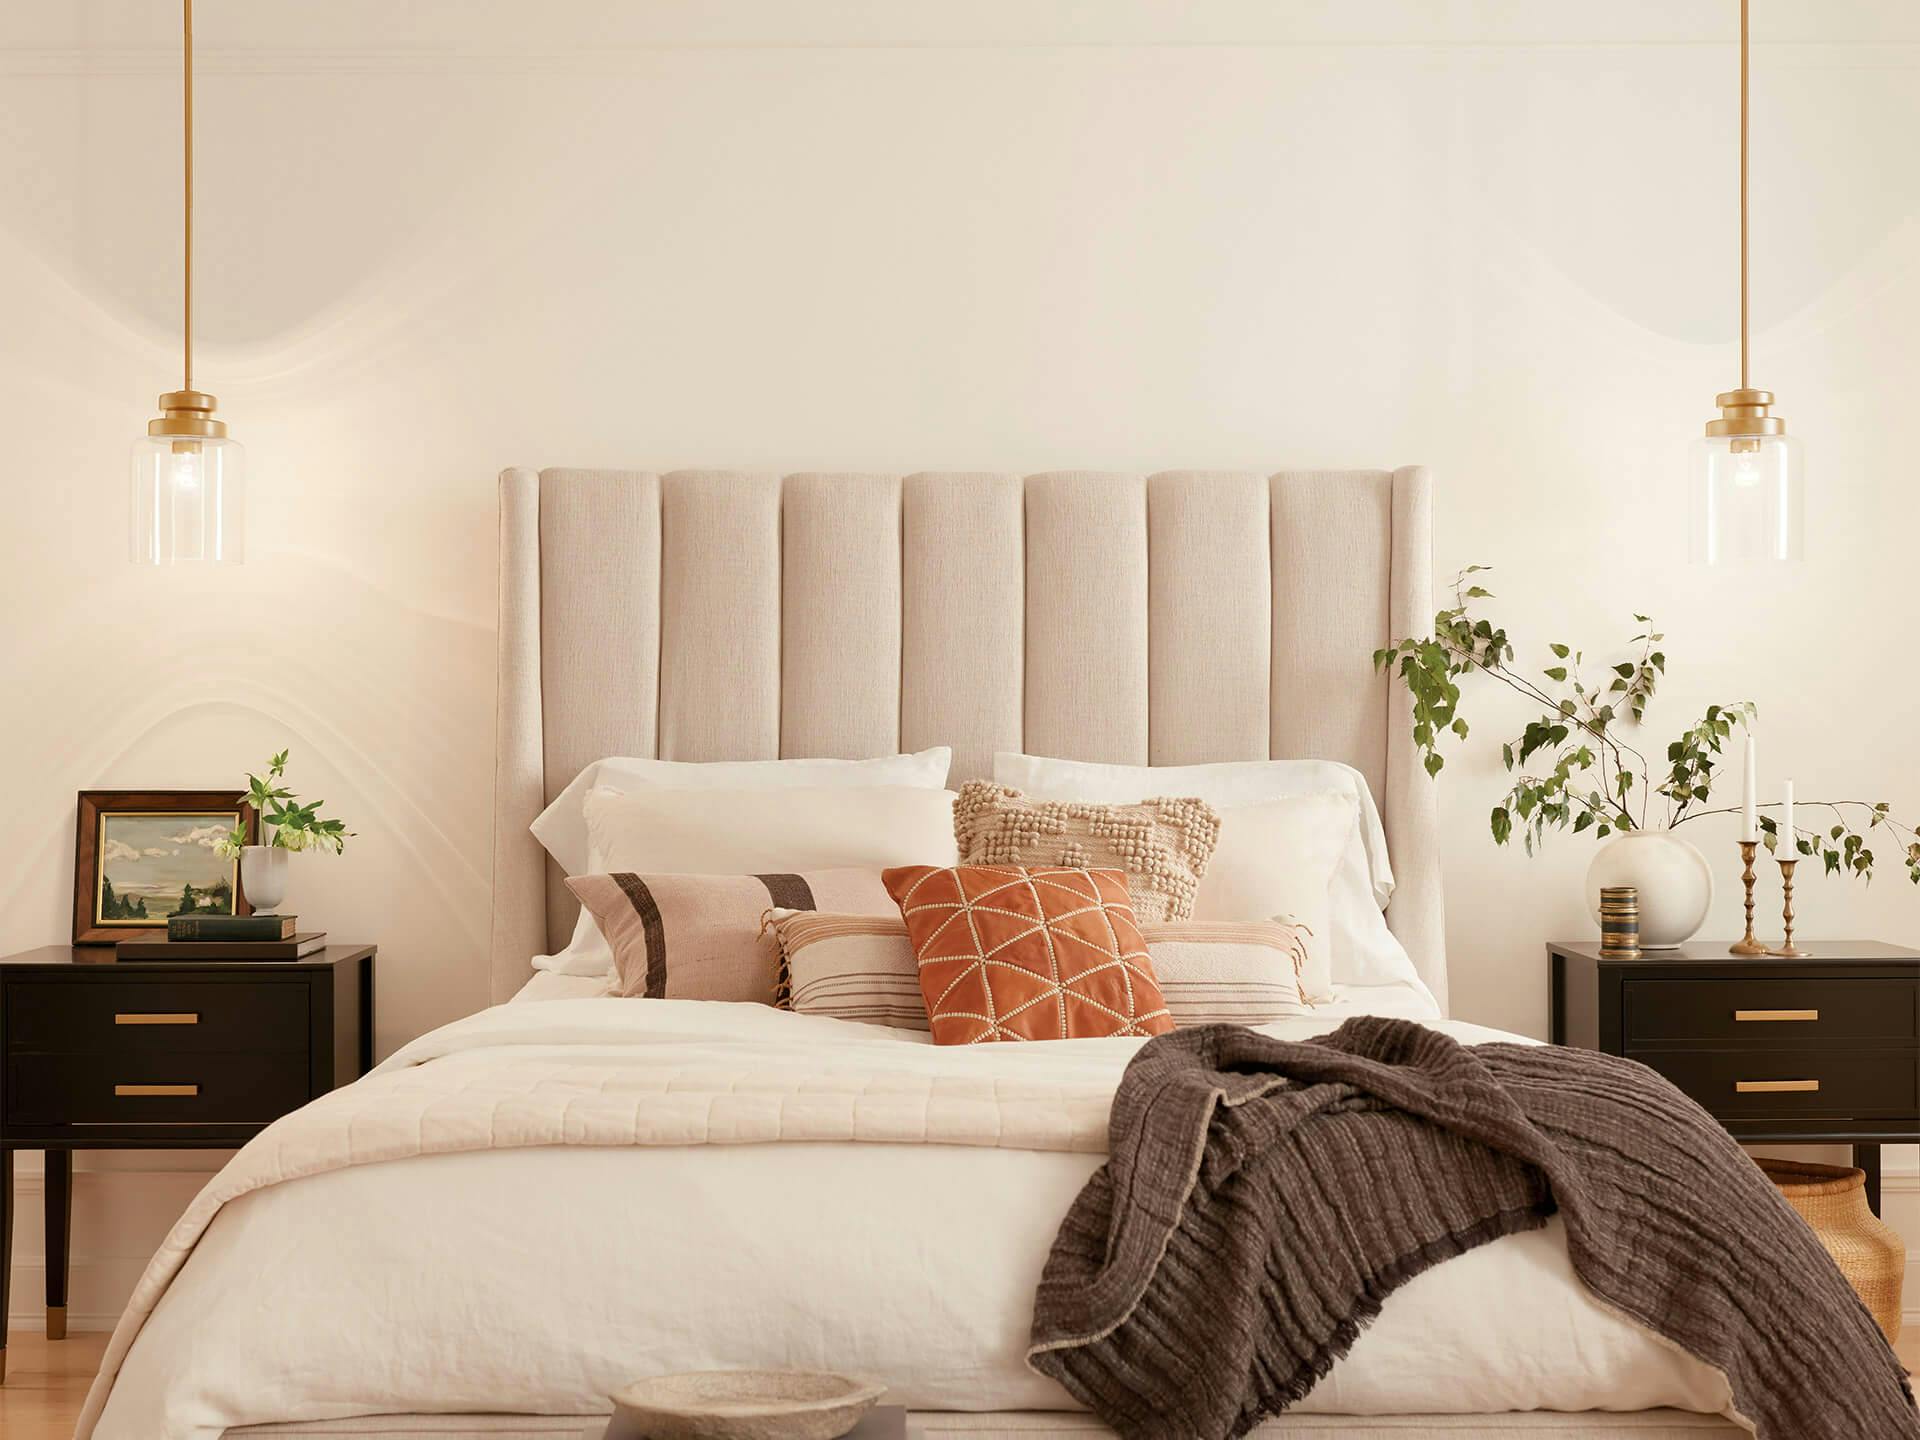 Bedroom with gold Annabeth pendants during the day